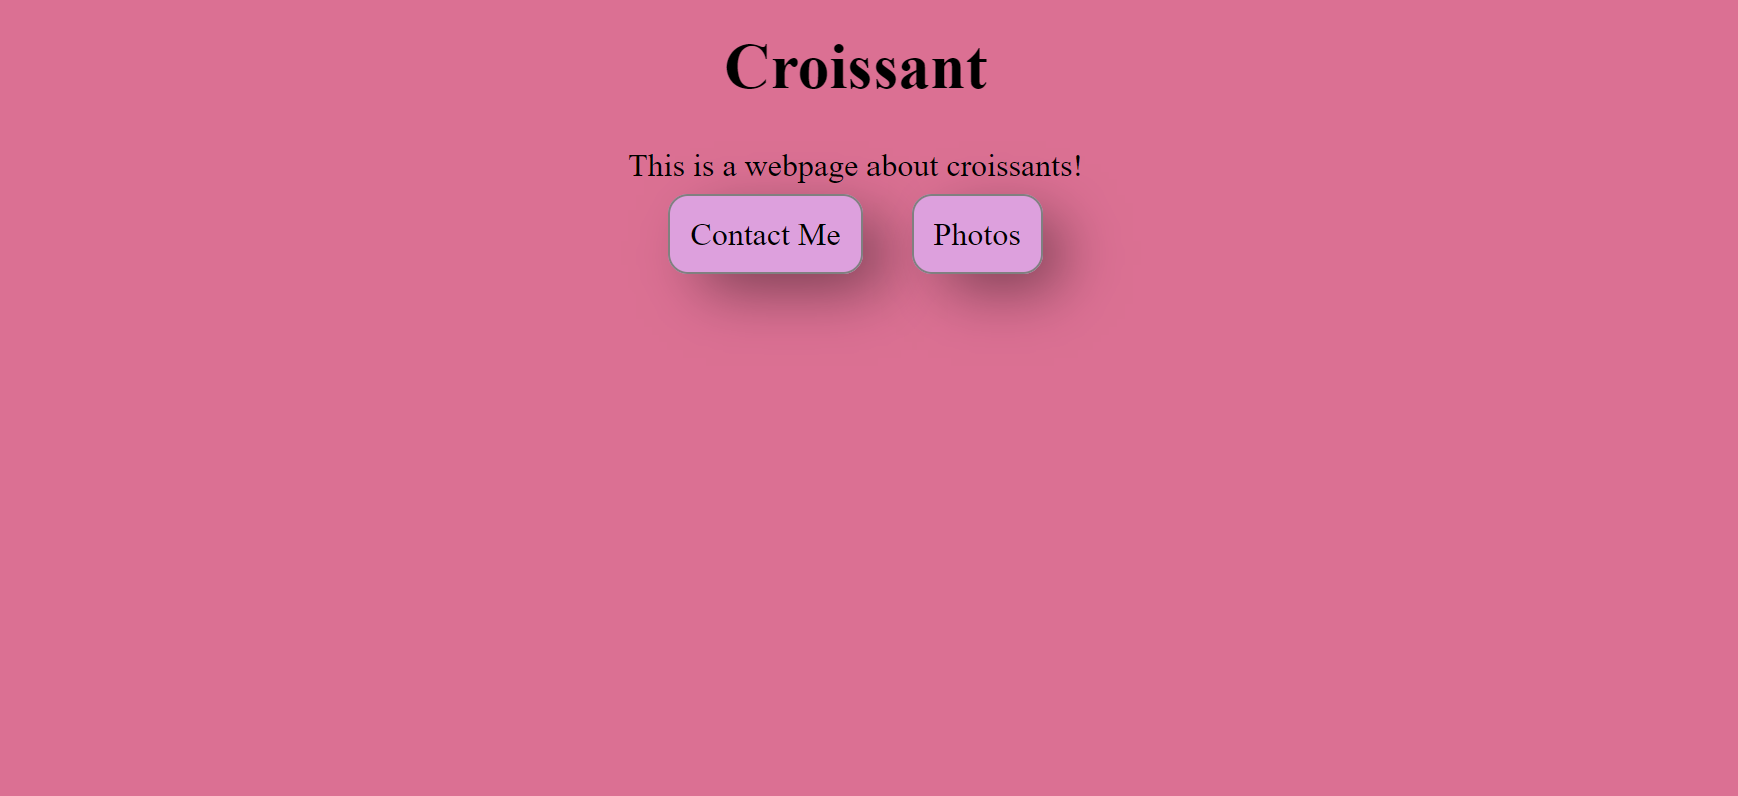 An image of a website about croissants